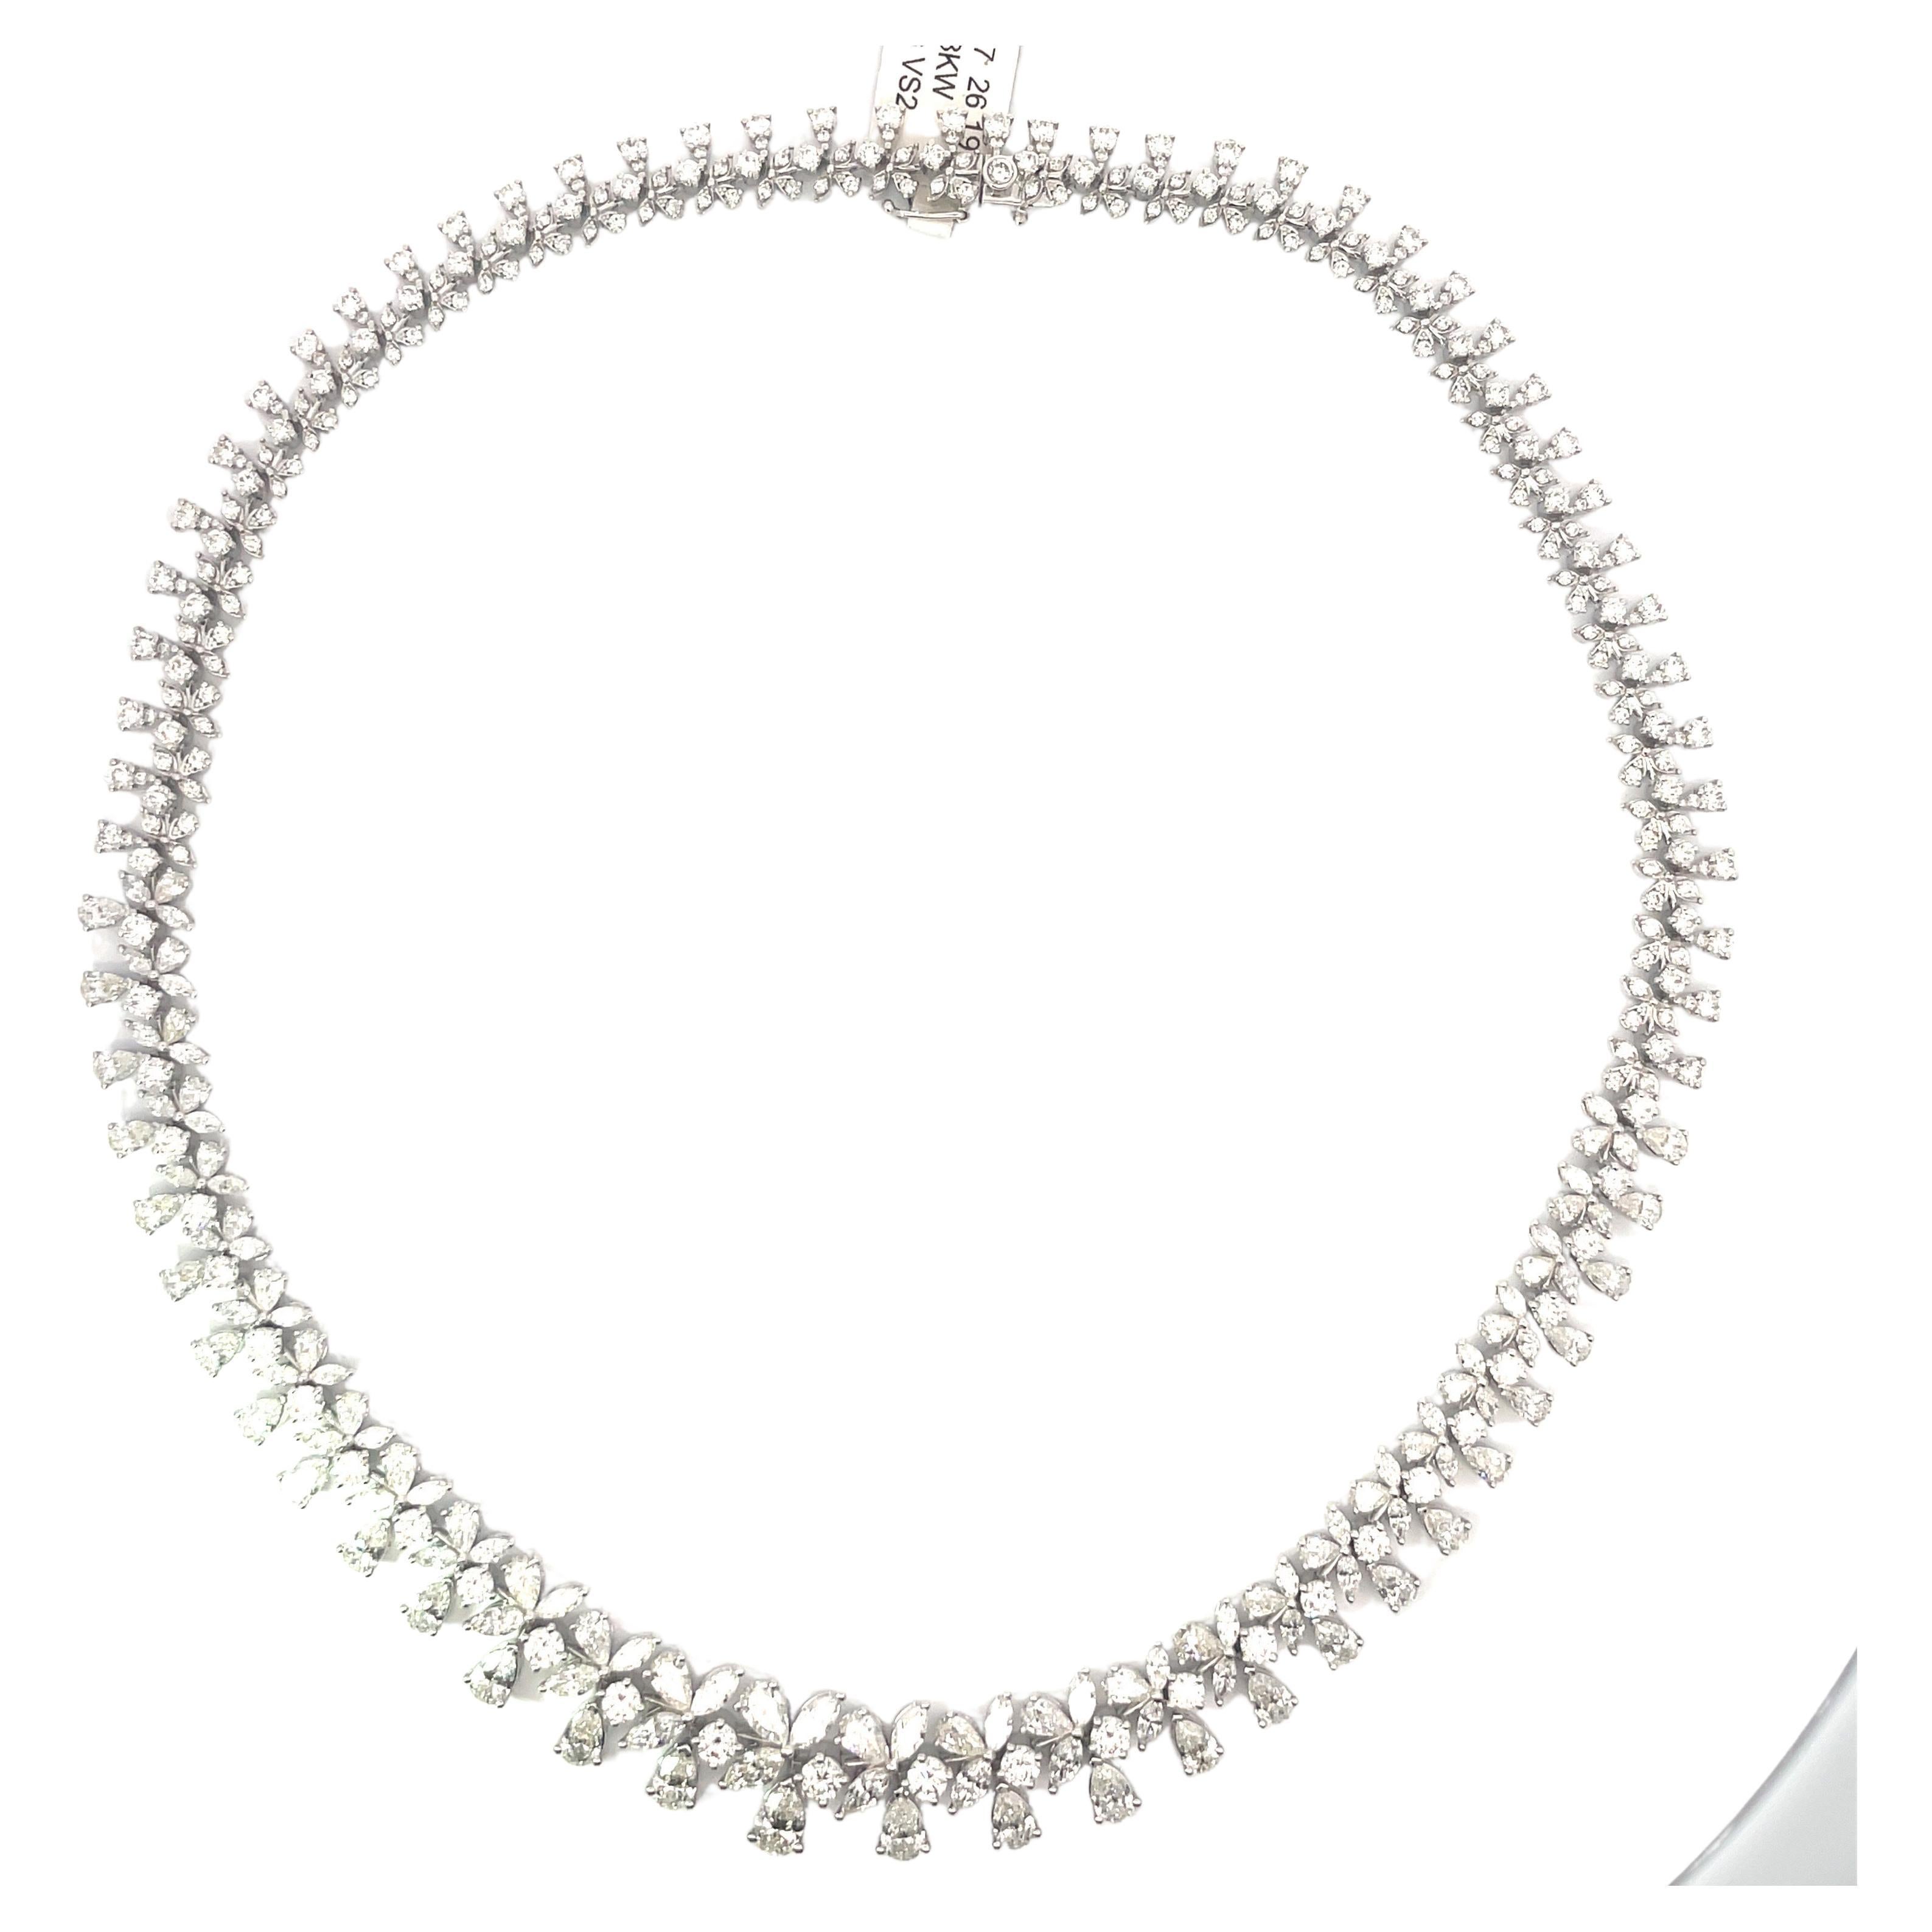 18 Karat White Gold drop necklace featuring a floral cluster of Pear, Marquise & Round Brilliant diamonds weighing a total of 26.19 Carats.
Color F-G
Clarity VS2
A real show stopper!